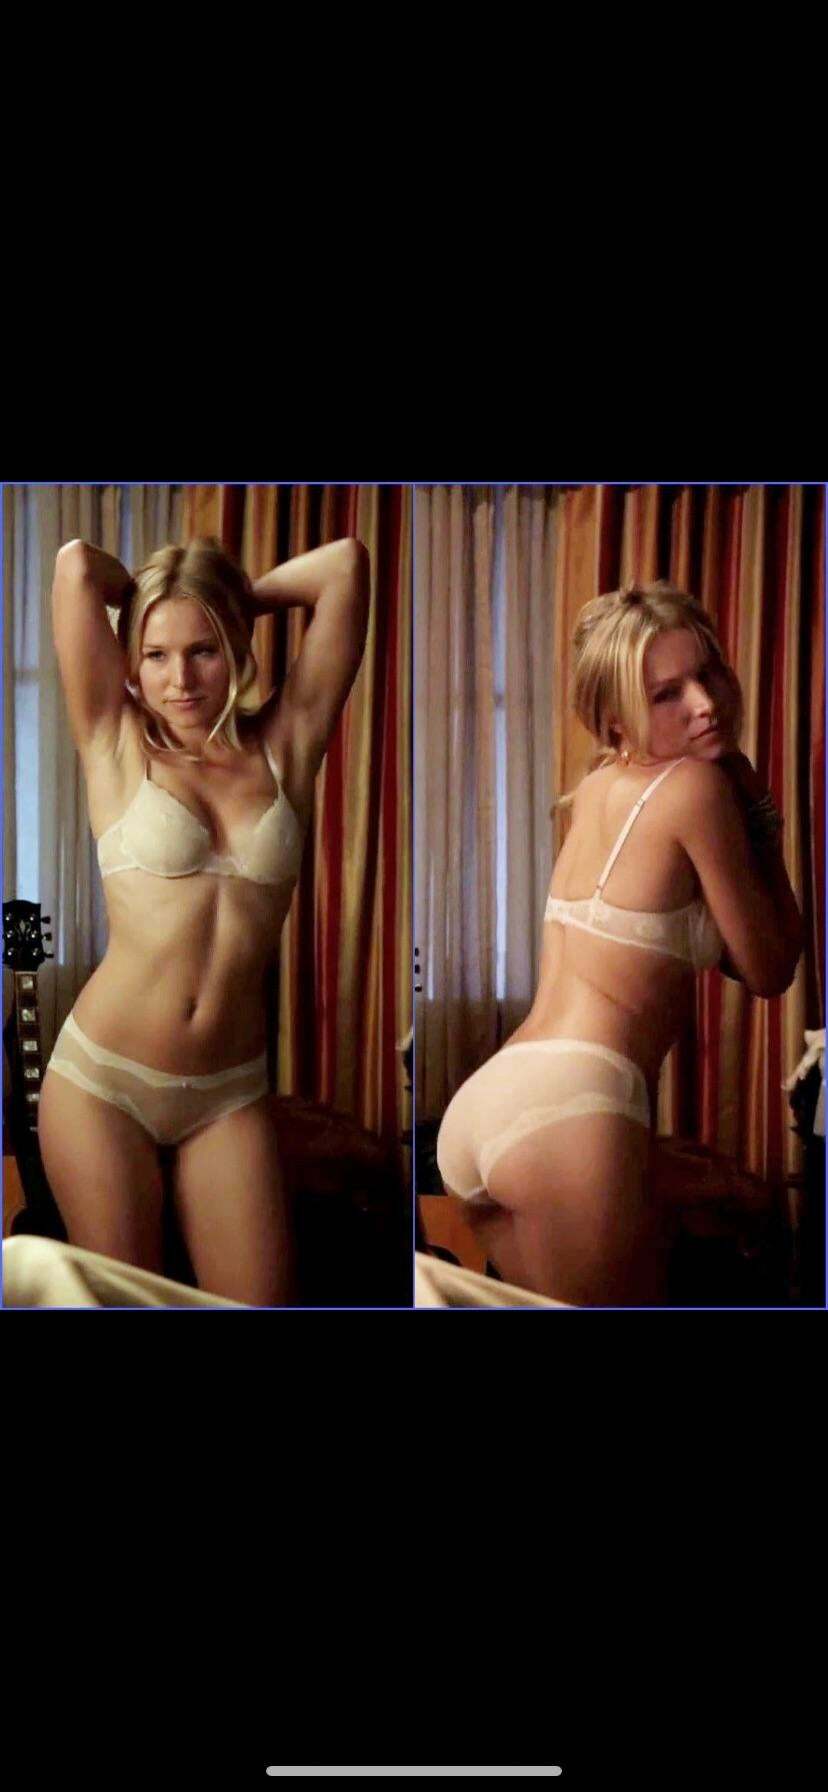 Those thighs look AMAZING. Kristen Bell